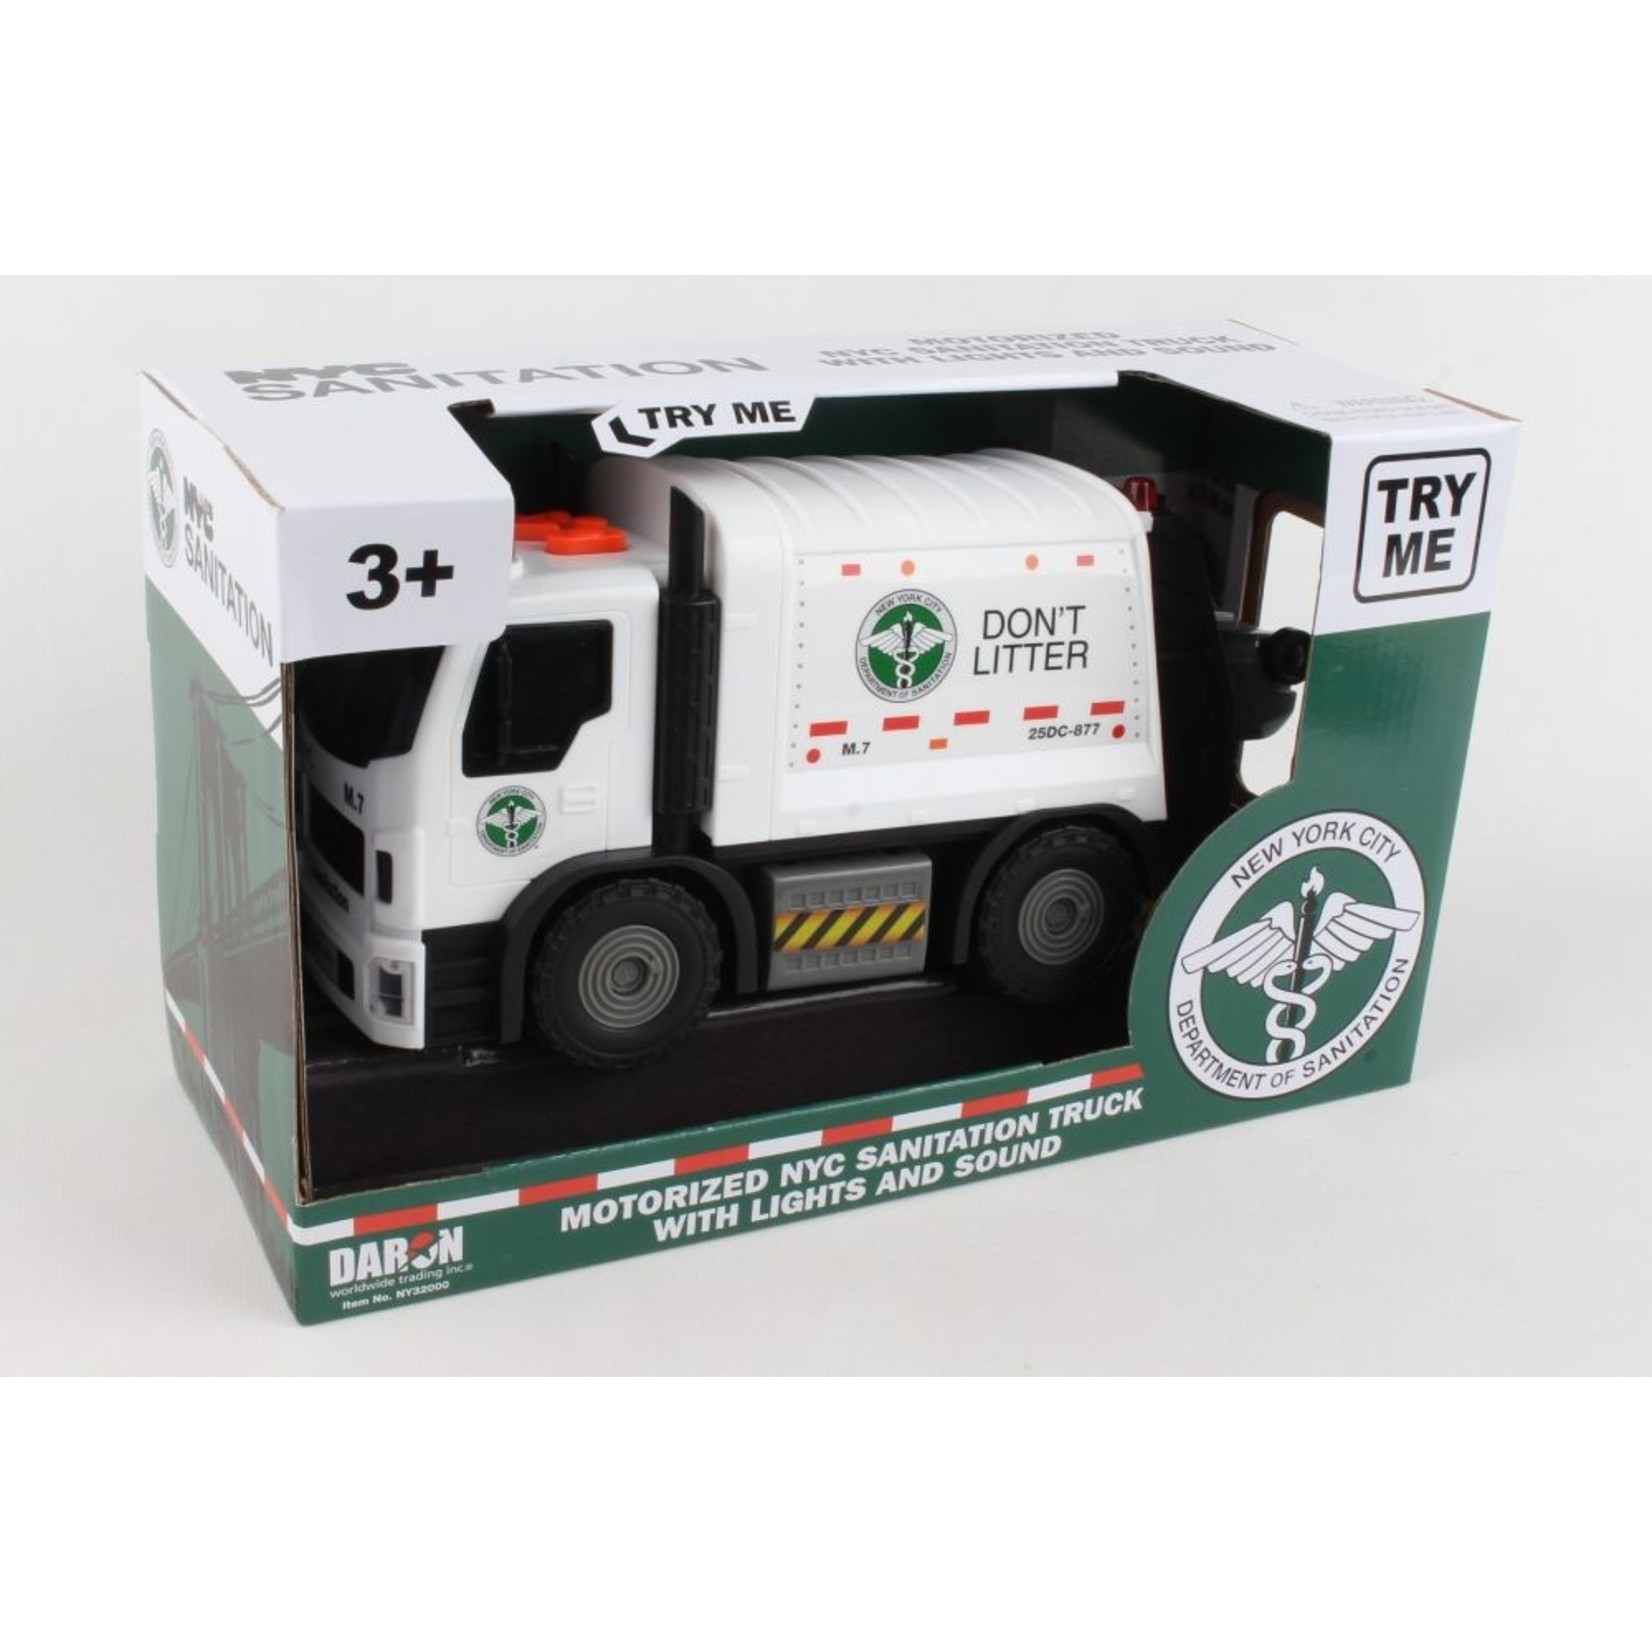 Daron Worldwide NY Motorized Garbage Truck w/ Lights and Sound